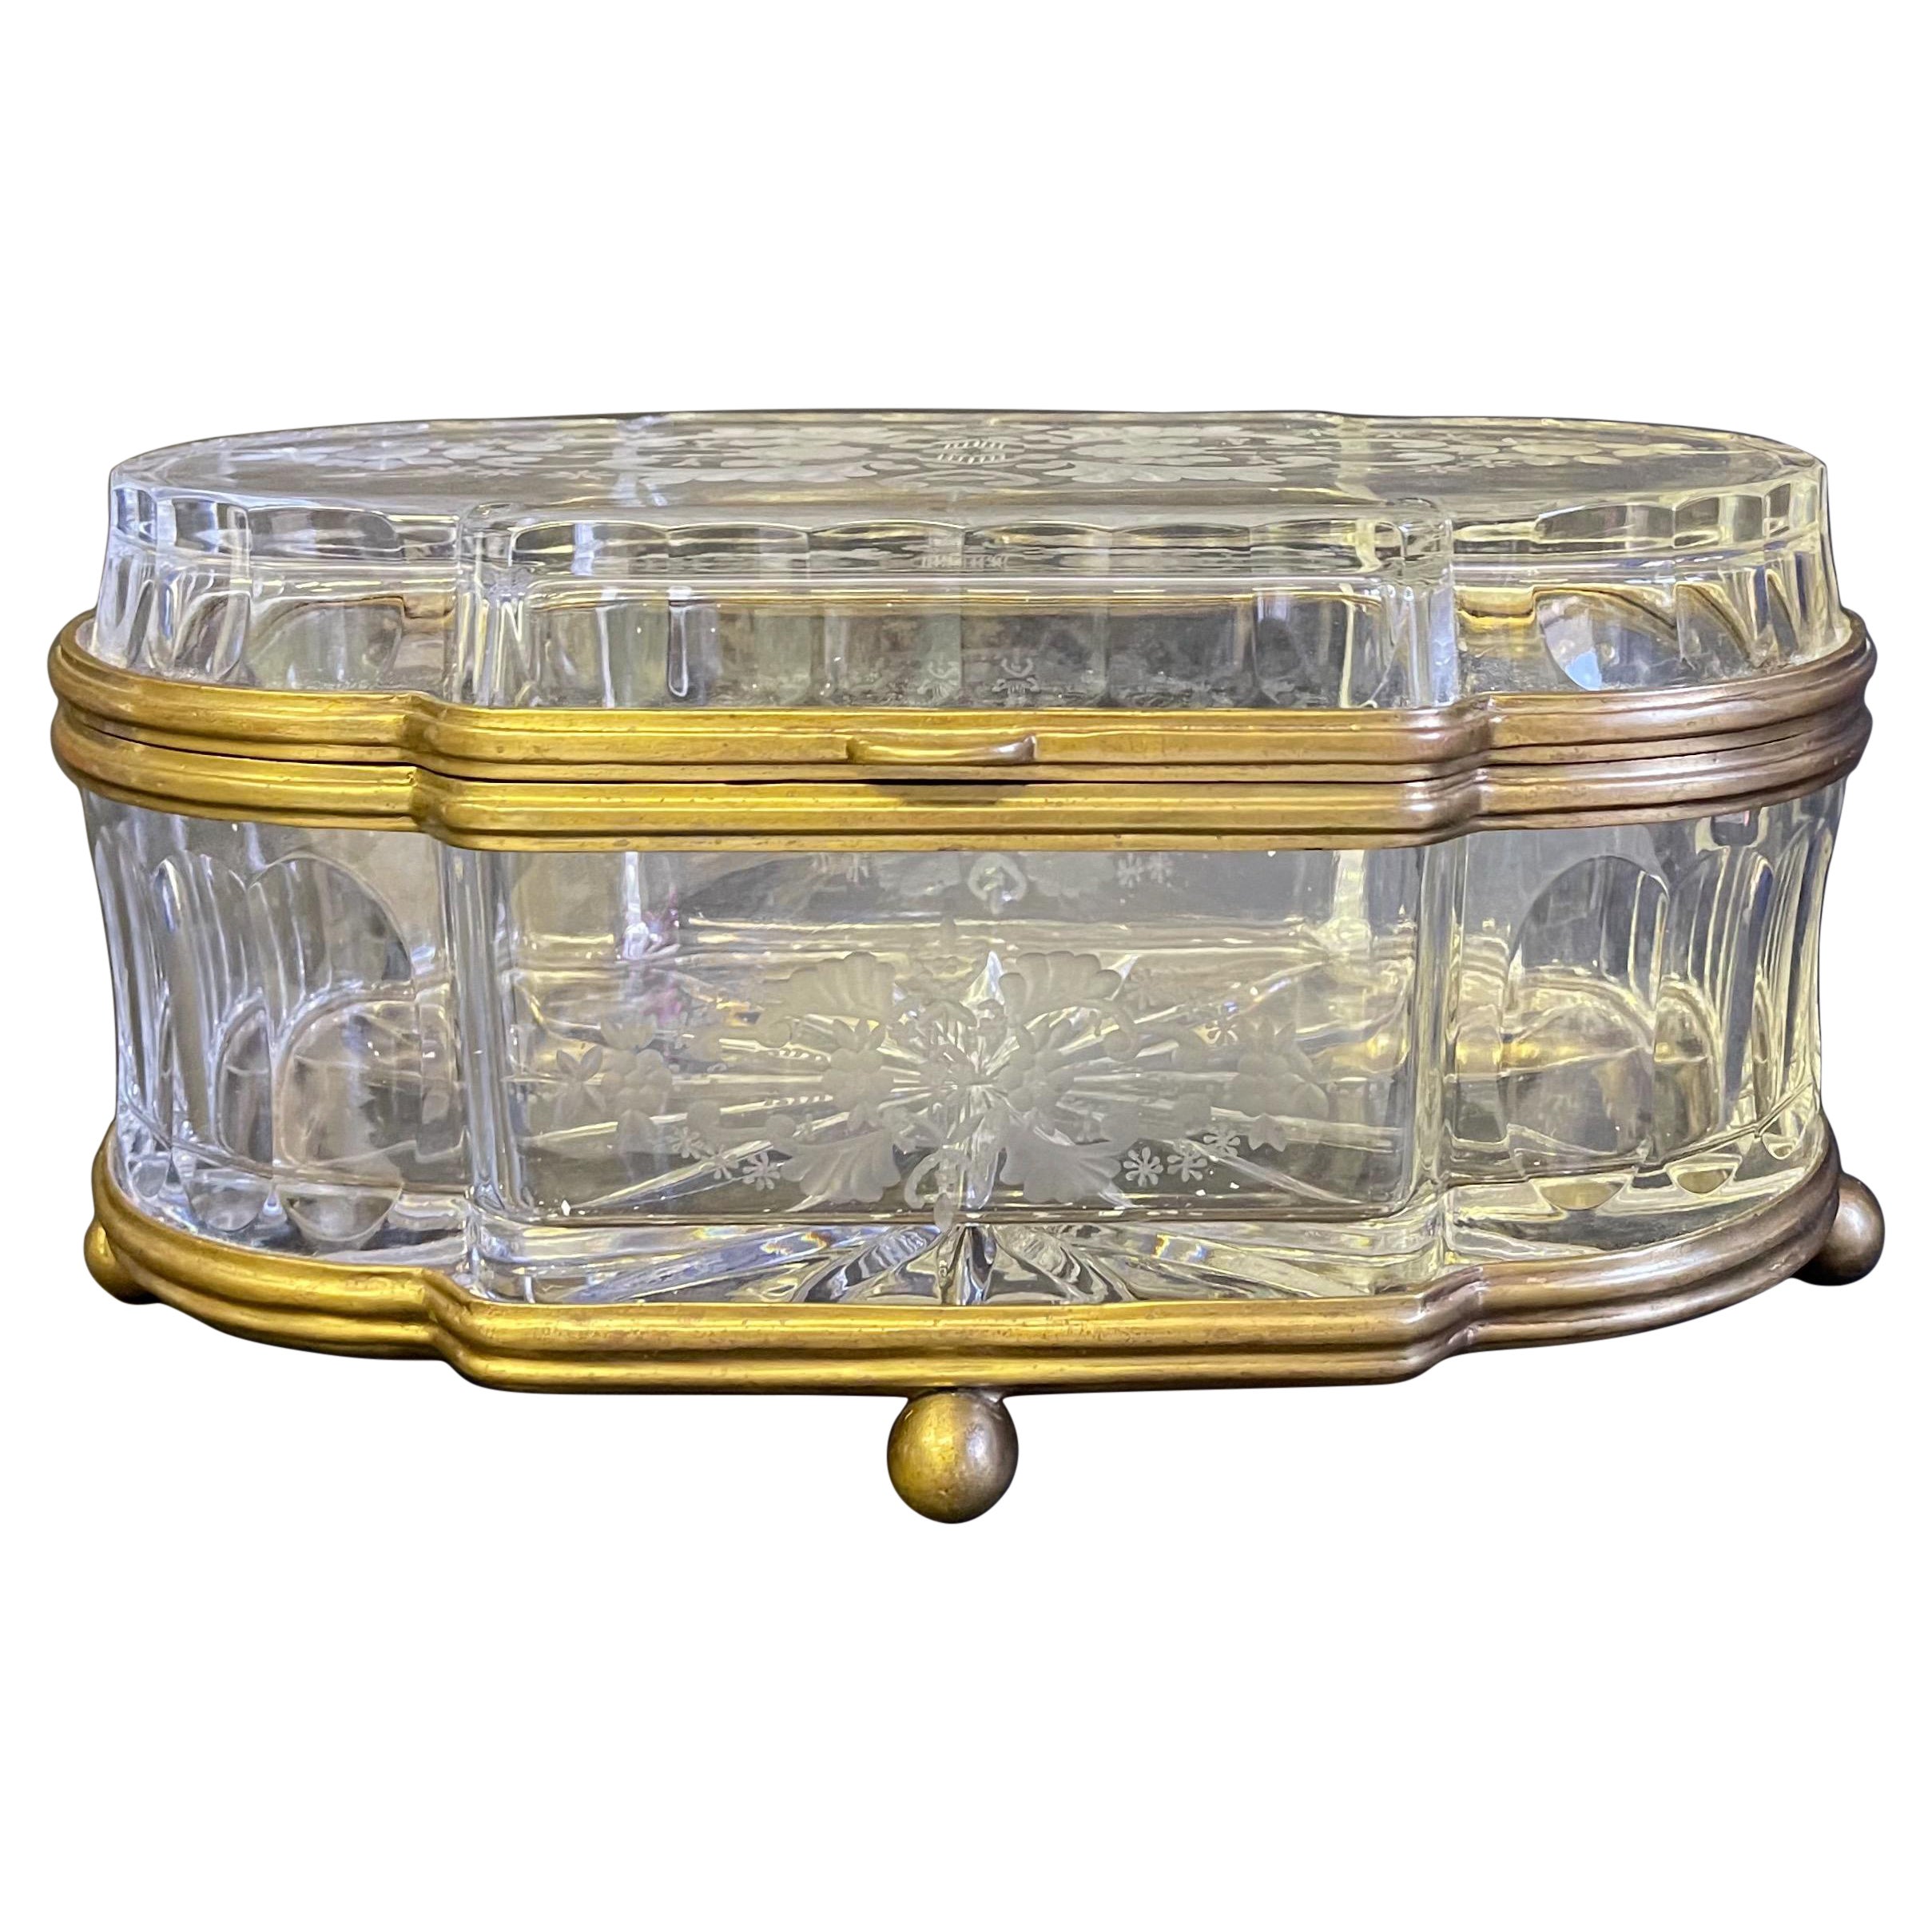 French Large Etched Cut Glass and Brass Lozenge Shape Box or Casket